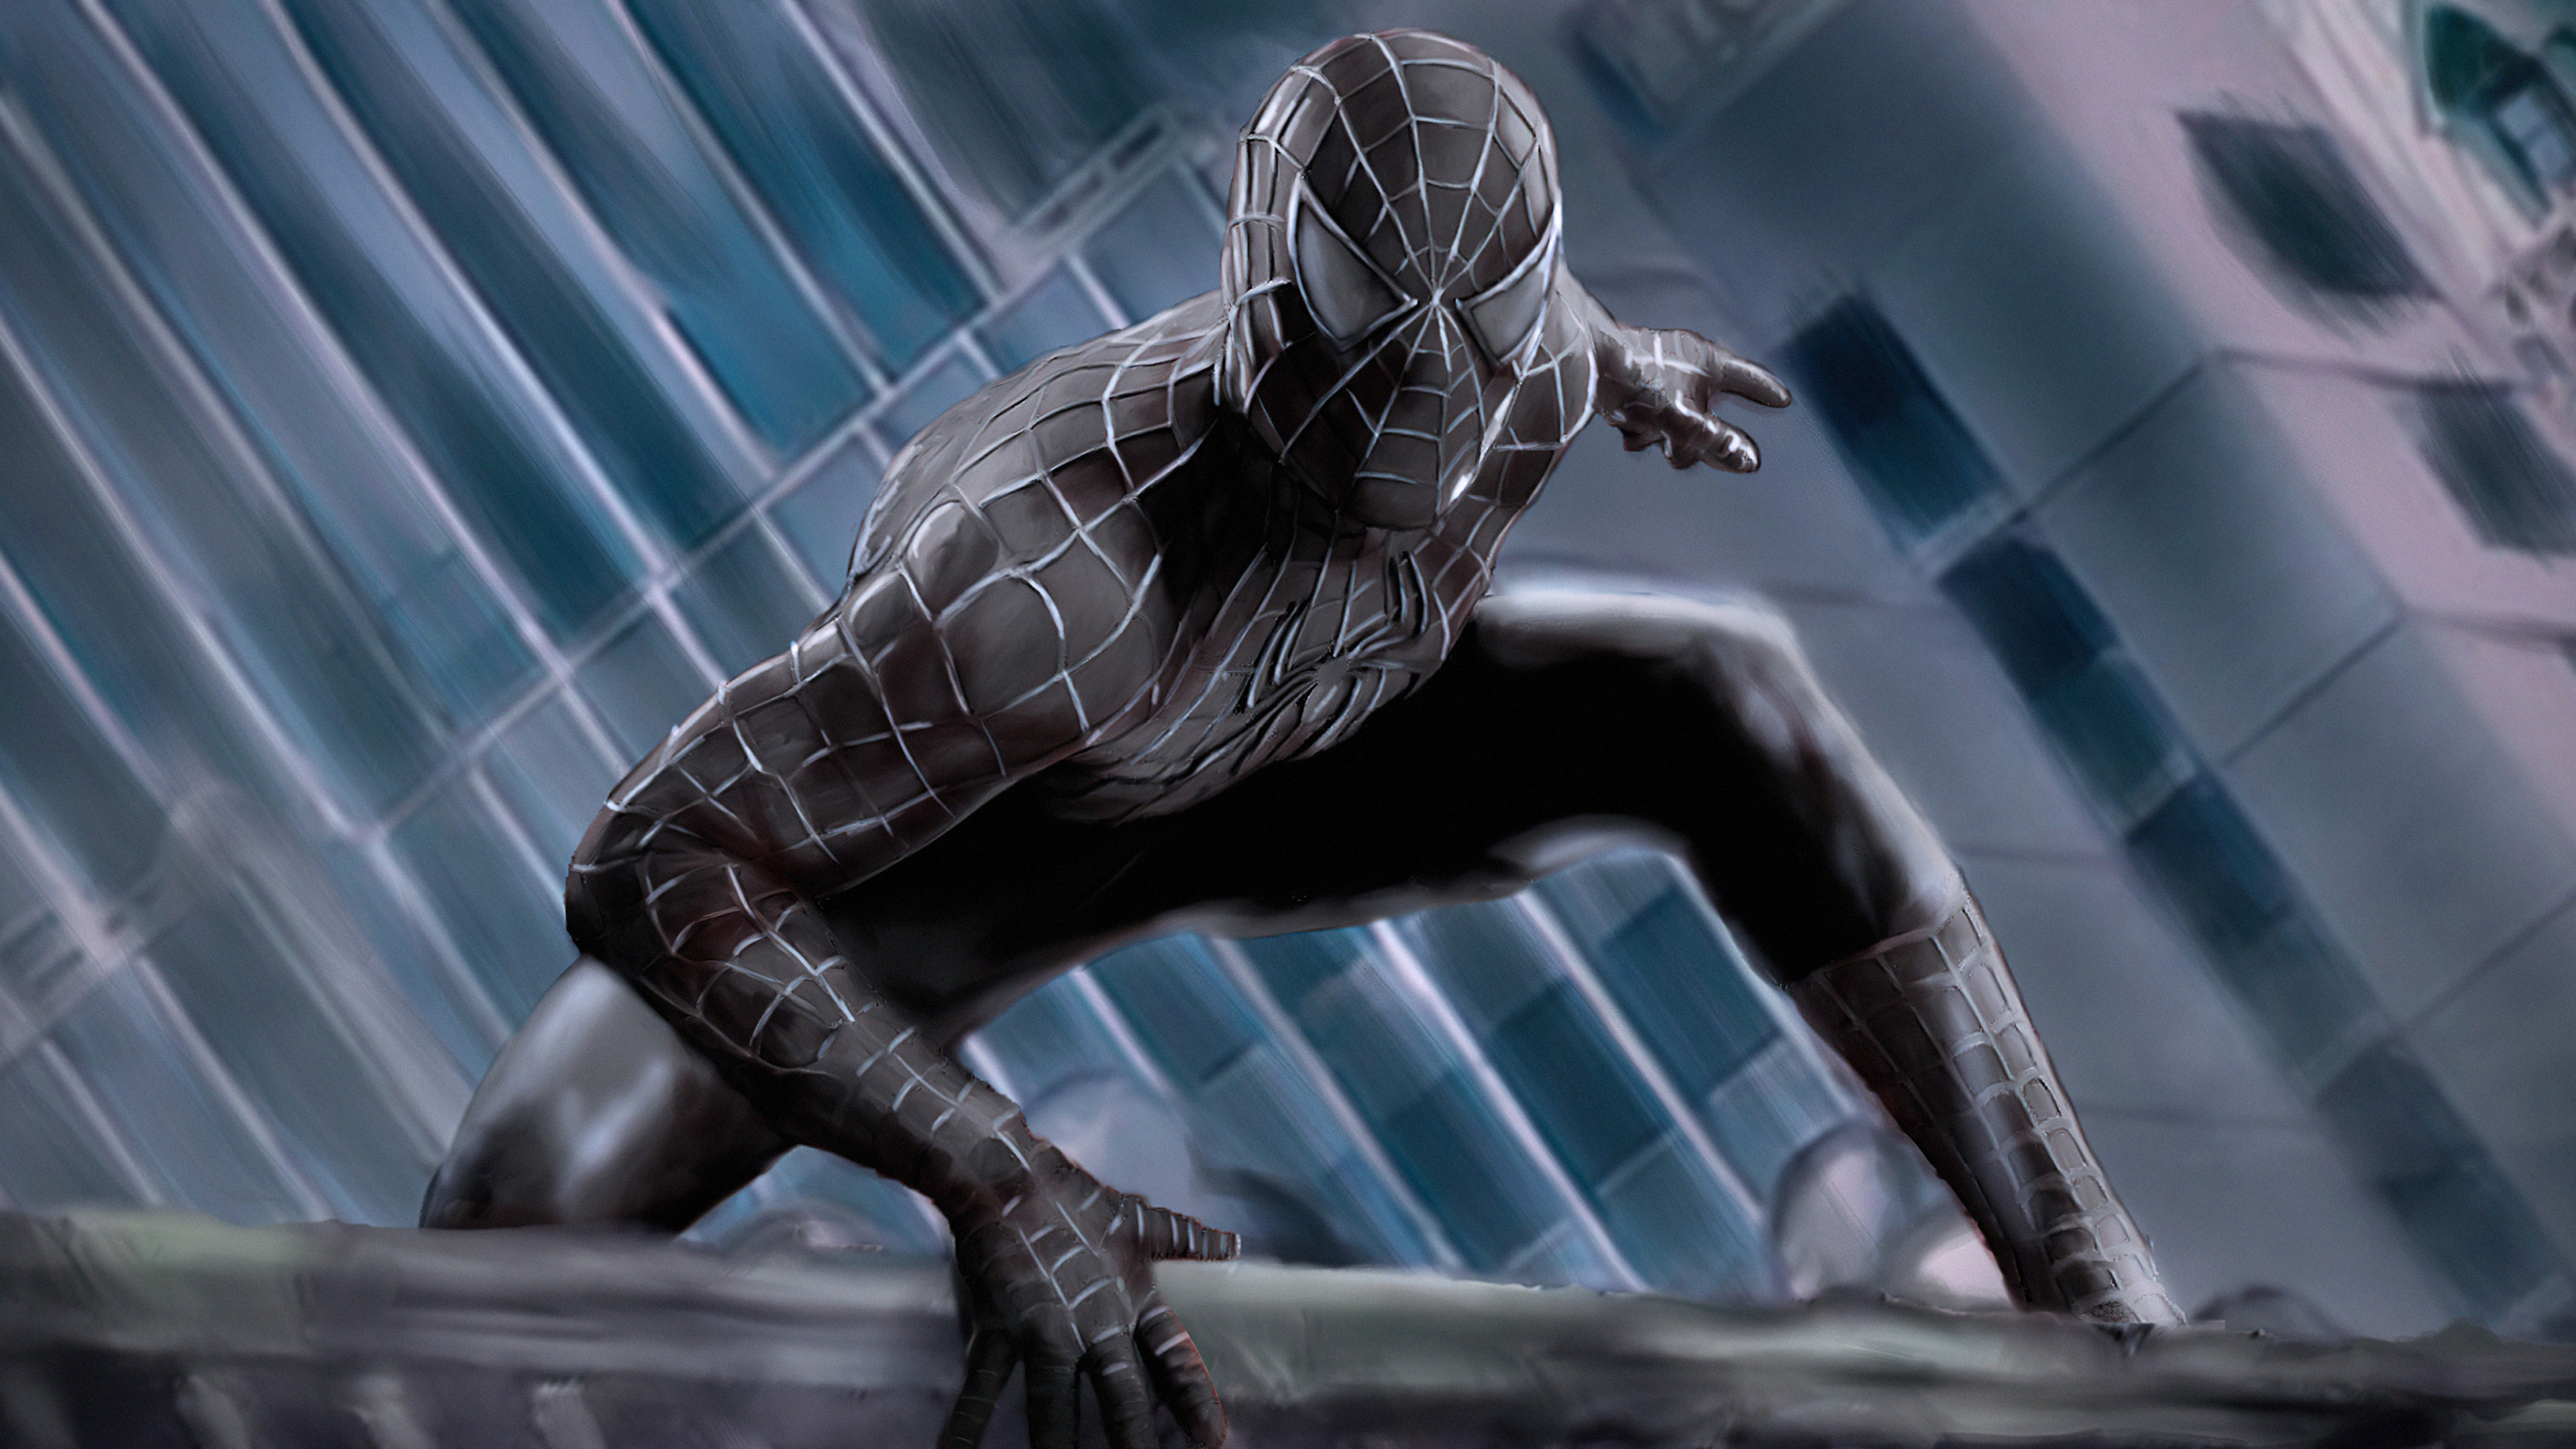 Marvel Comics Spider Man Black Costume Wallpaper Hd Superheroes 4k Wallpapers Images Photos And Background Wallpapers Den